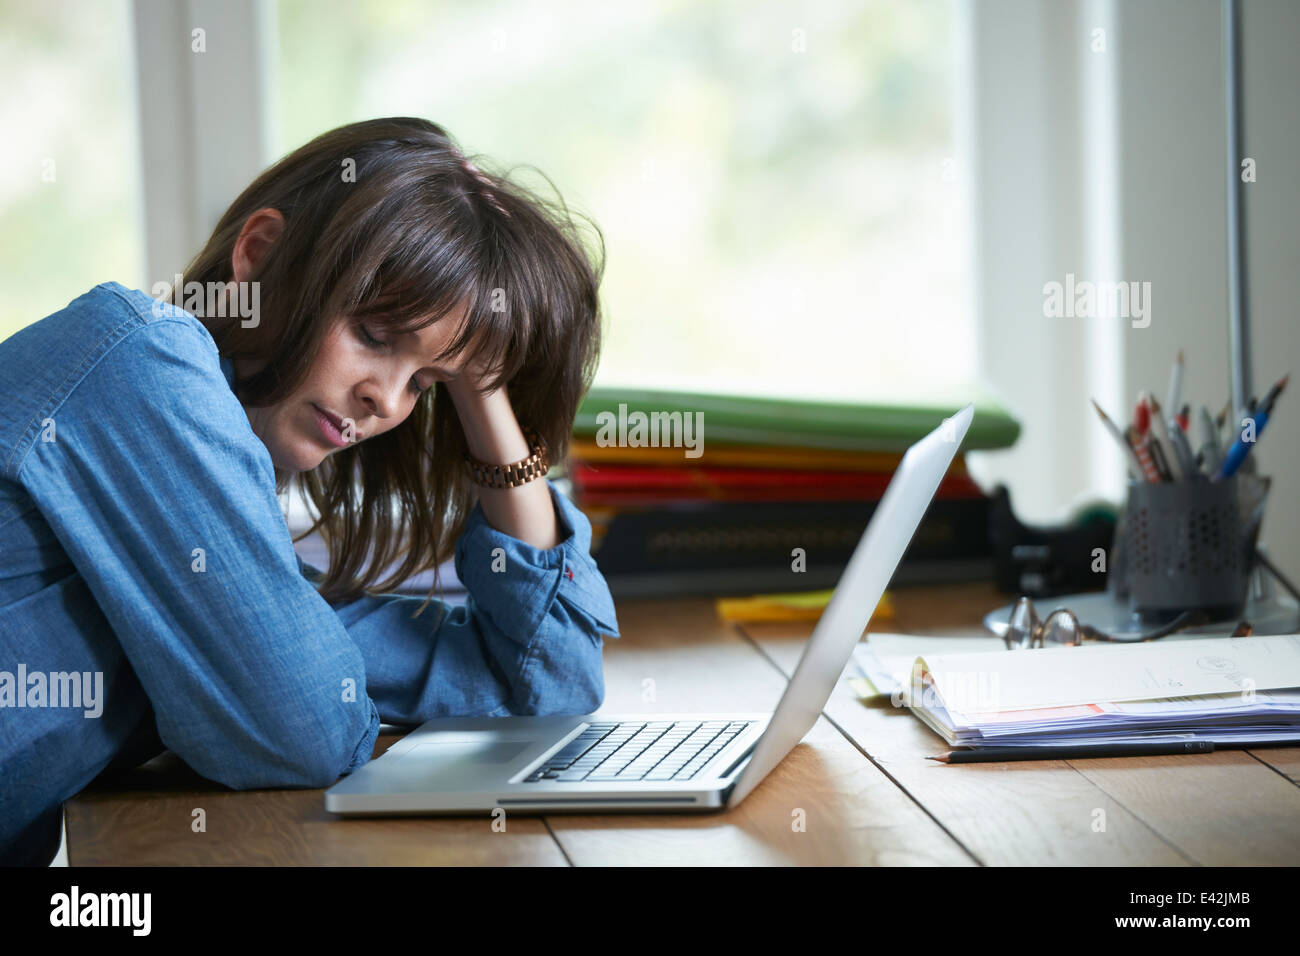 Woman sitting at desk with laptop, eyes closed Stock Photo